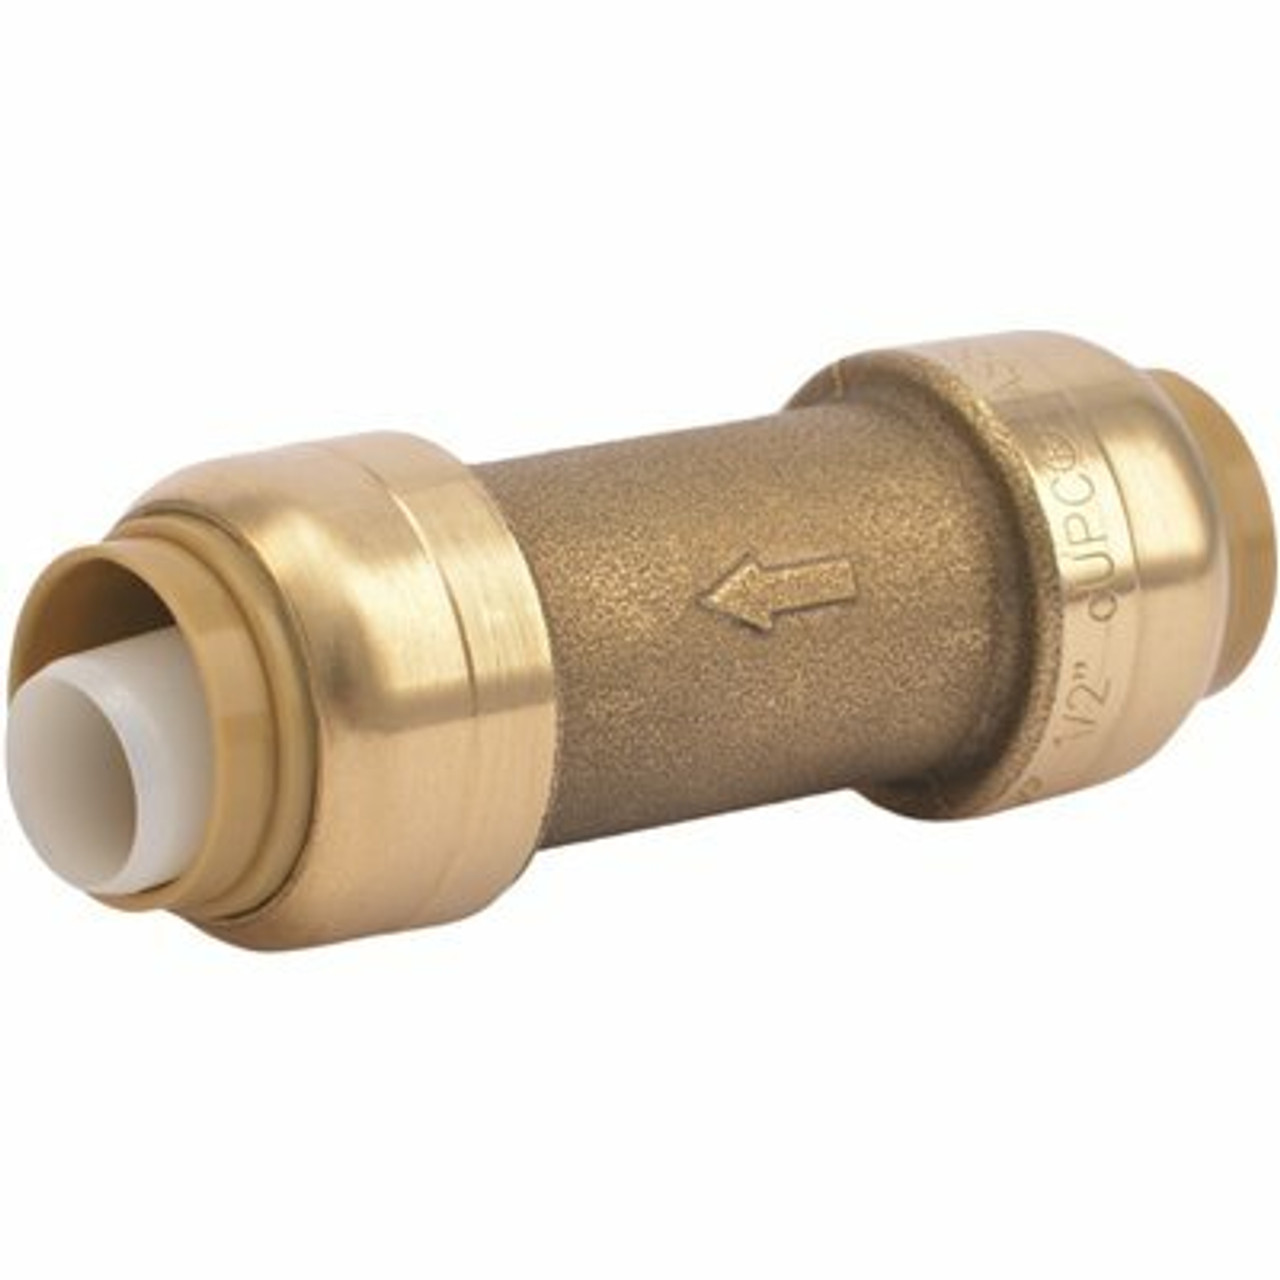 SharkBite 1/2 In. Push-To-Connect Brass Check Valve